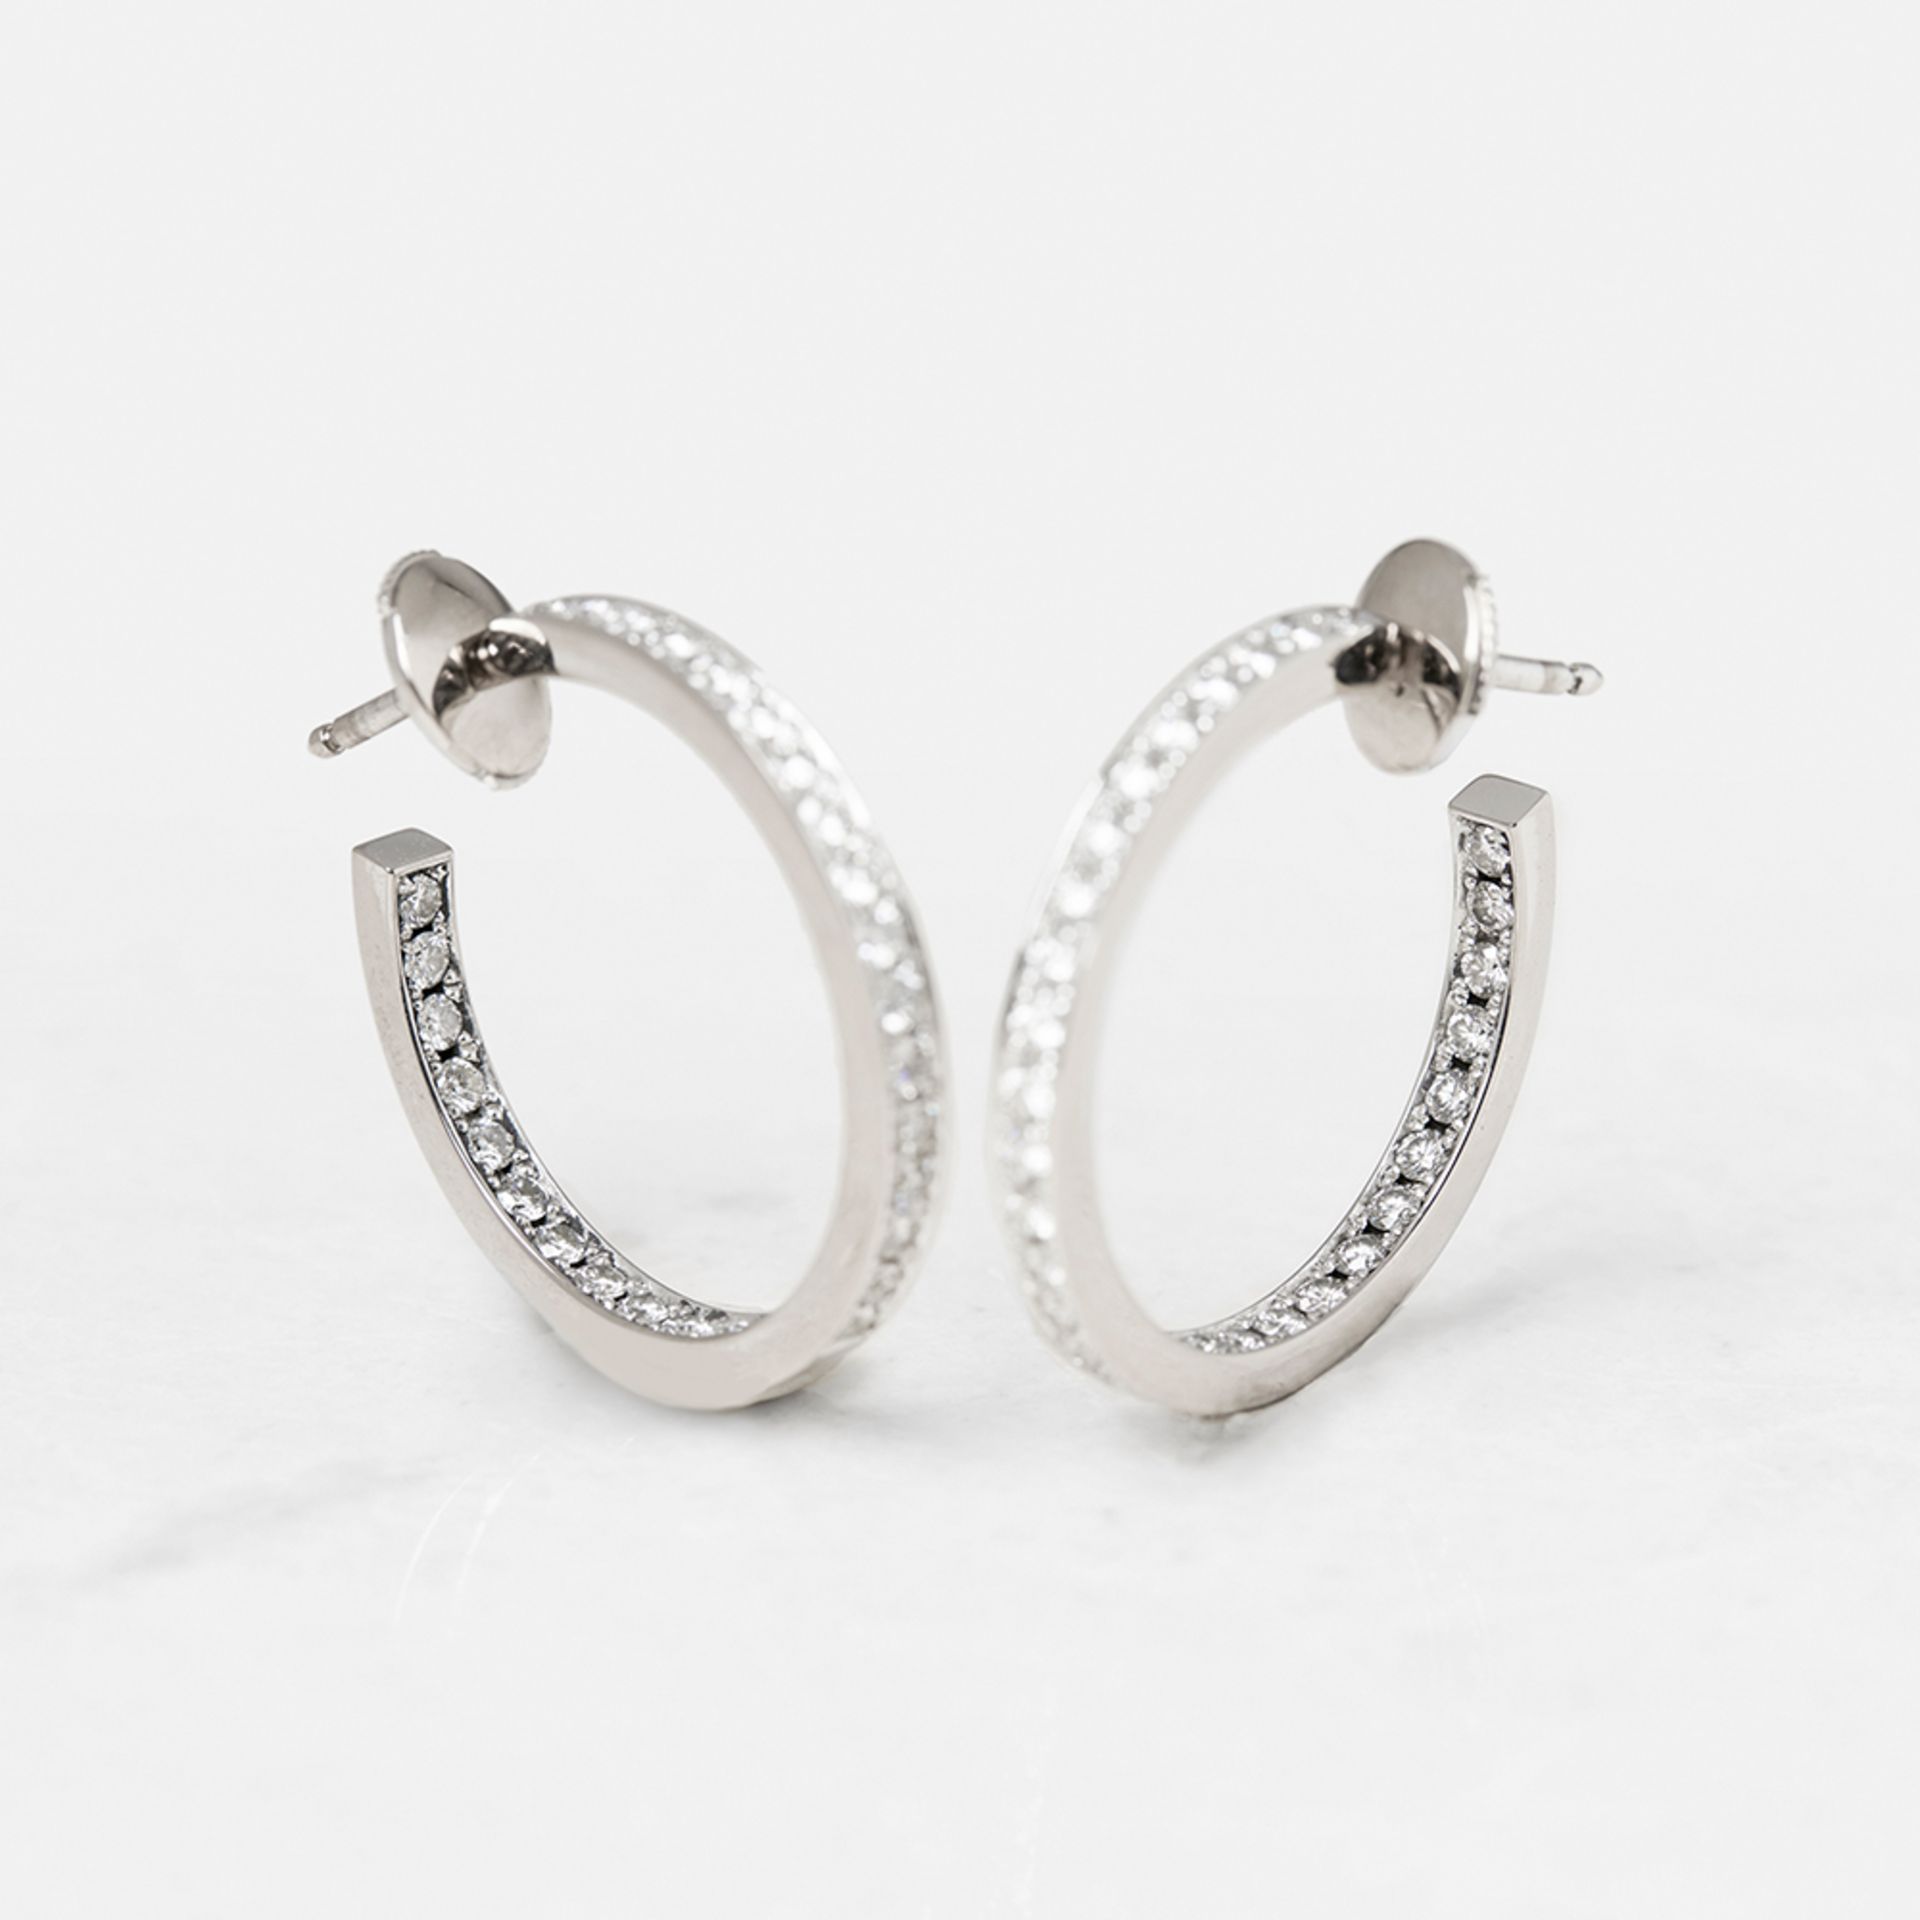 Cartier 18k White Gold 1.20ct Diamond Inside Out Hoop Earrings - Image 12 of 14